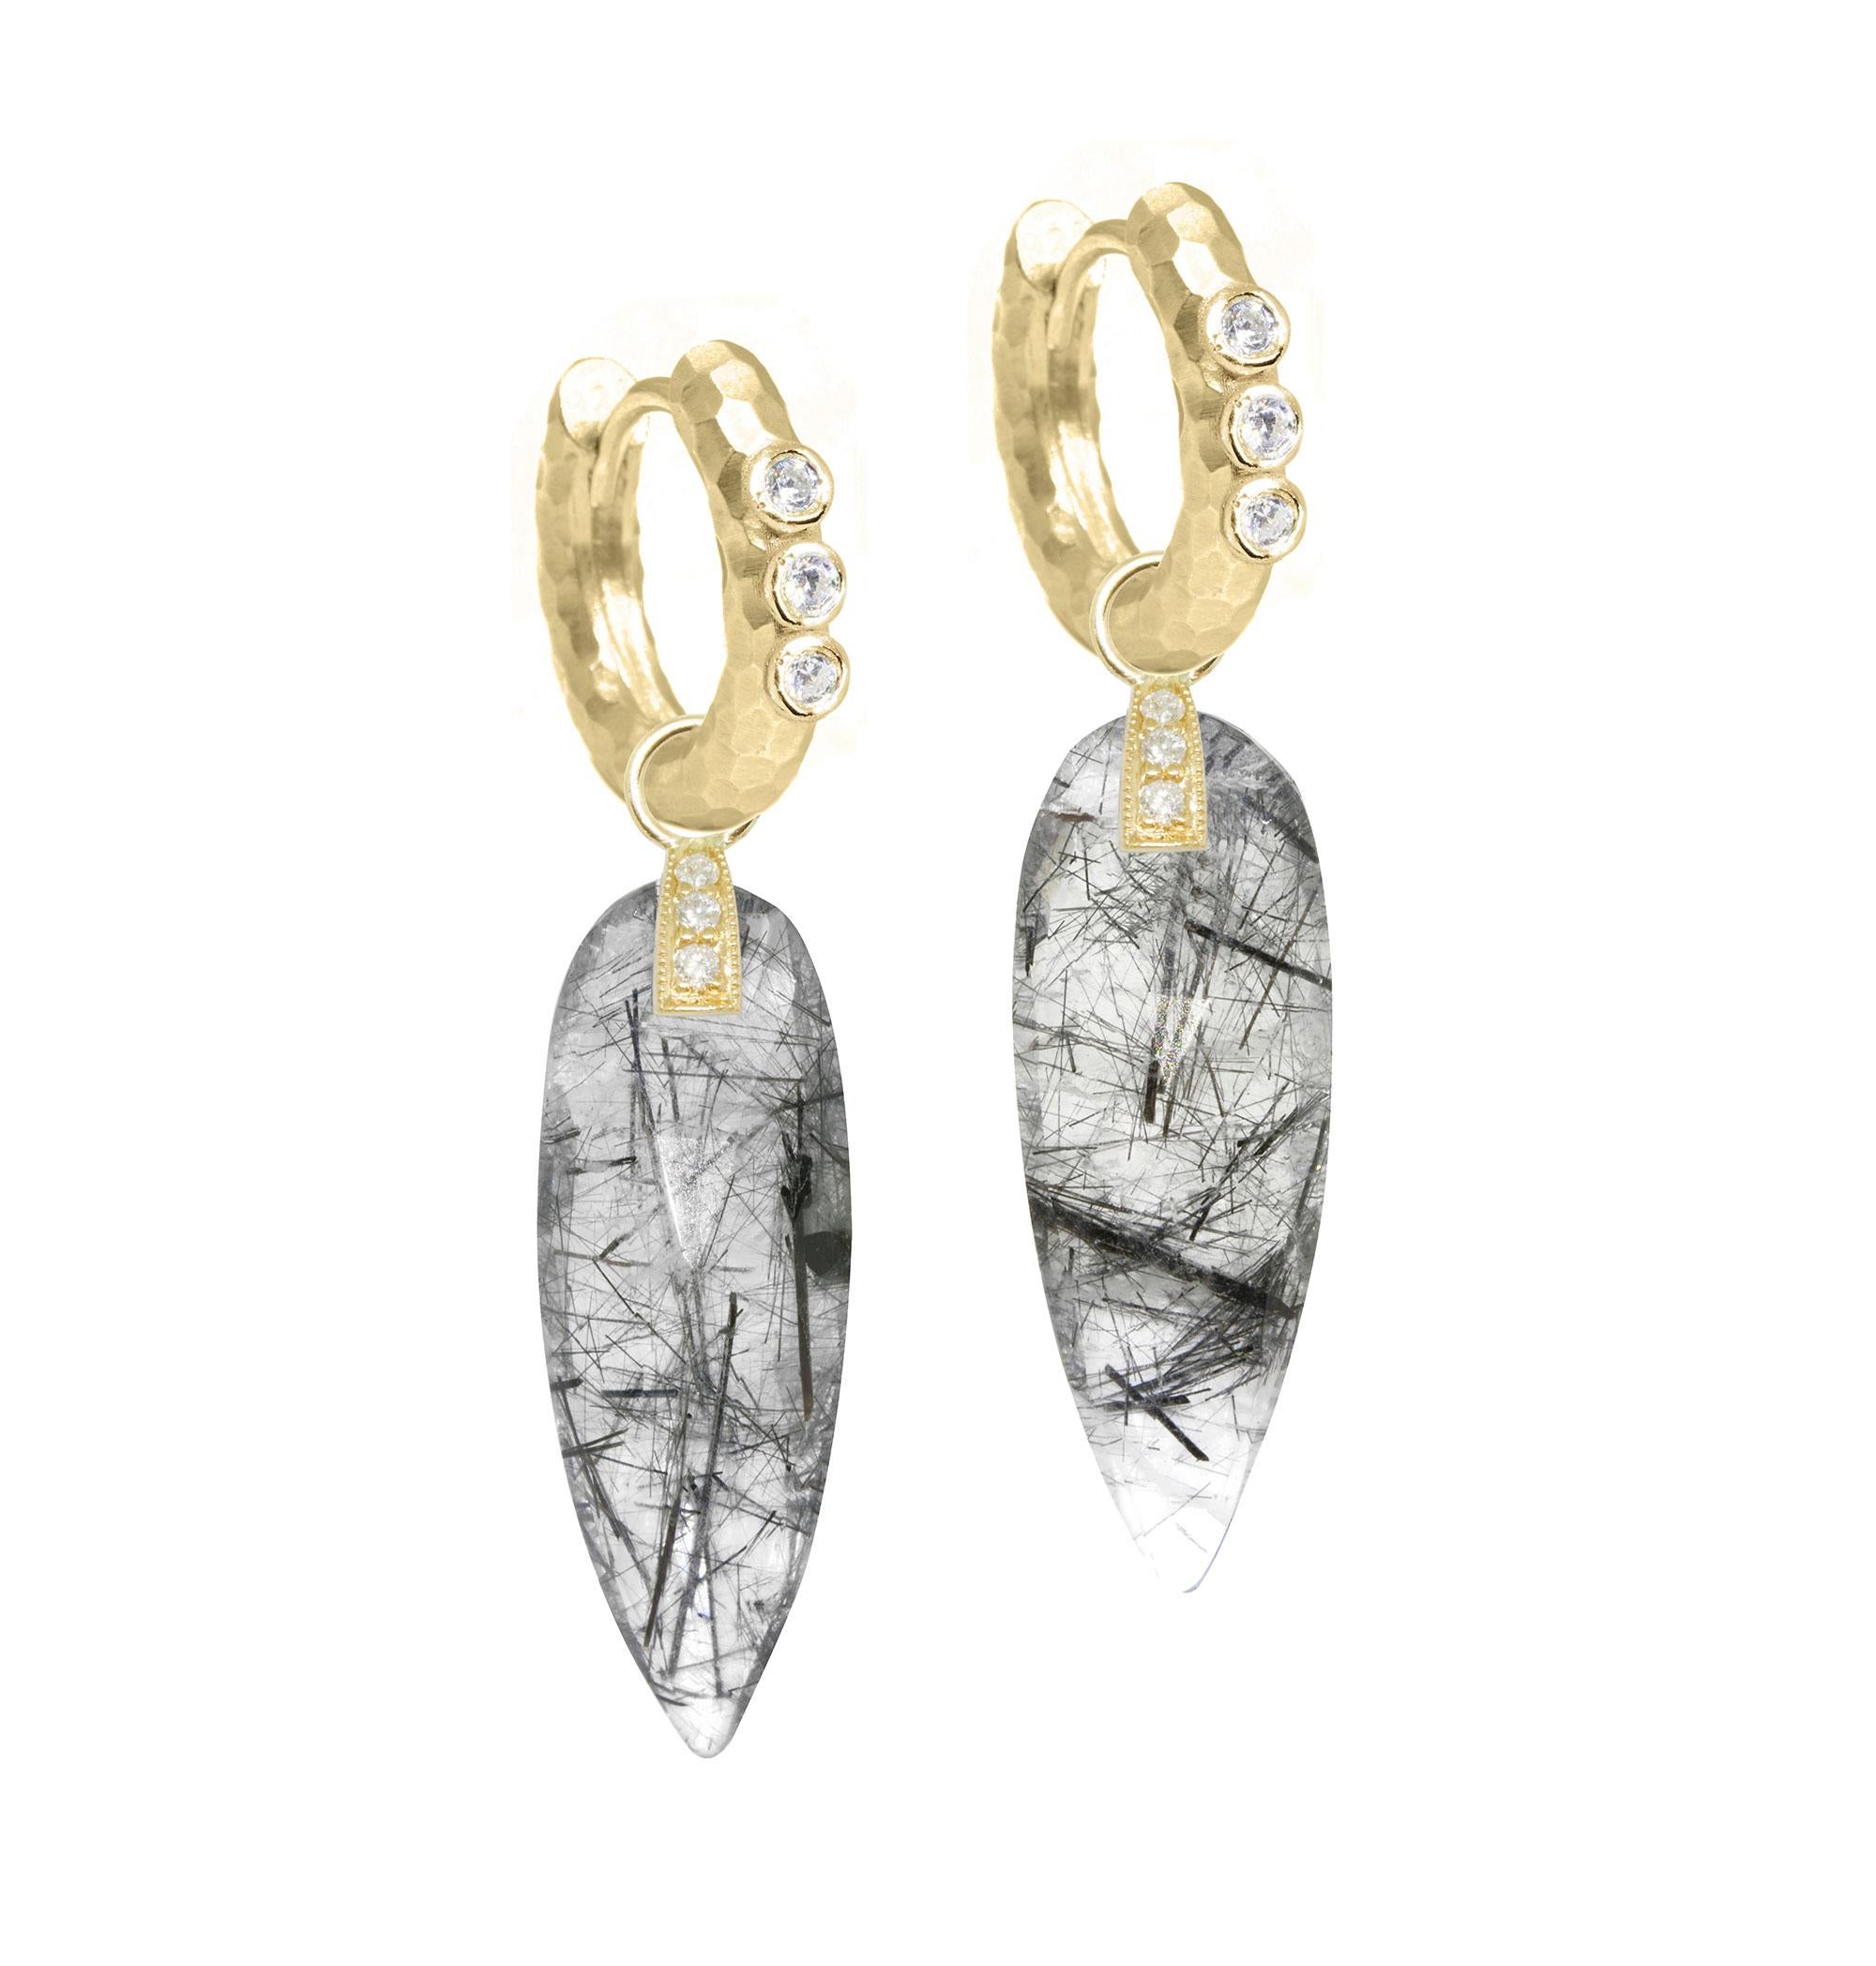 Subtle, luminous color and a graphic, geometric shape: the Angel Wings 30mm Gold Charms make a statement with black tourmalated quartz drops dangling from a diamond-studded bale.


Nina Wynn Design's patent-pending earrings have an element on the